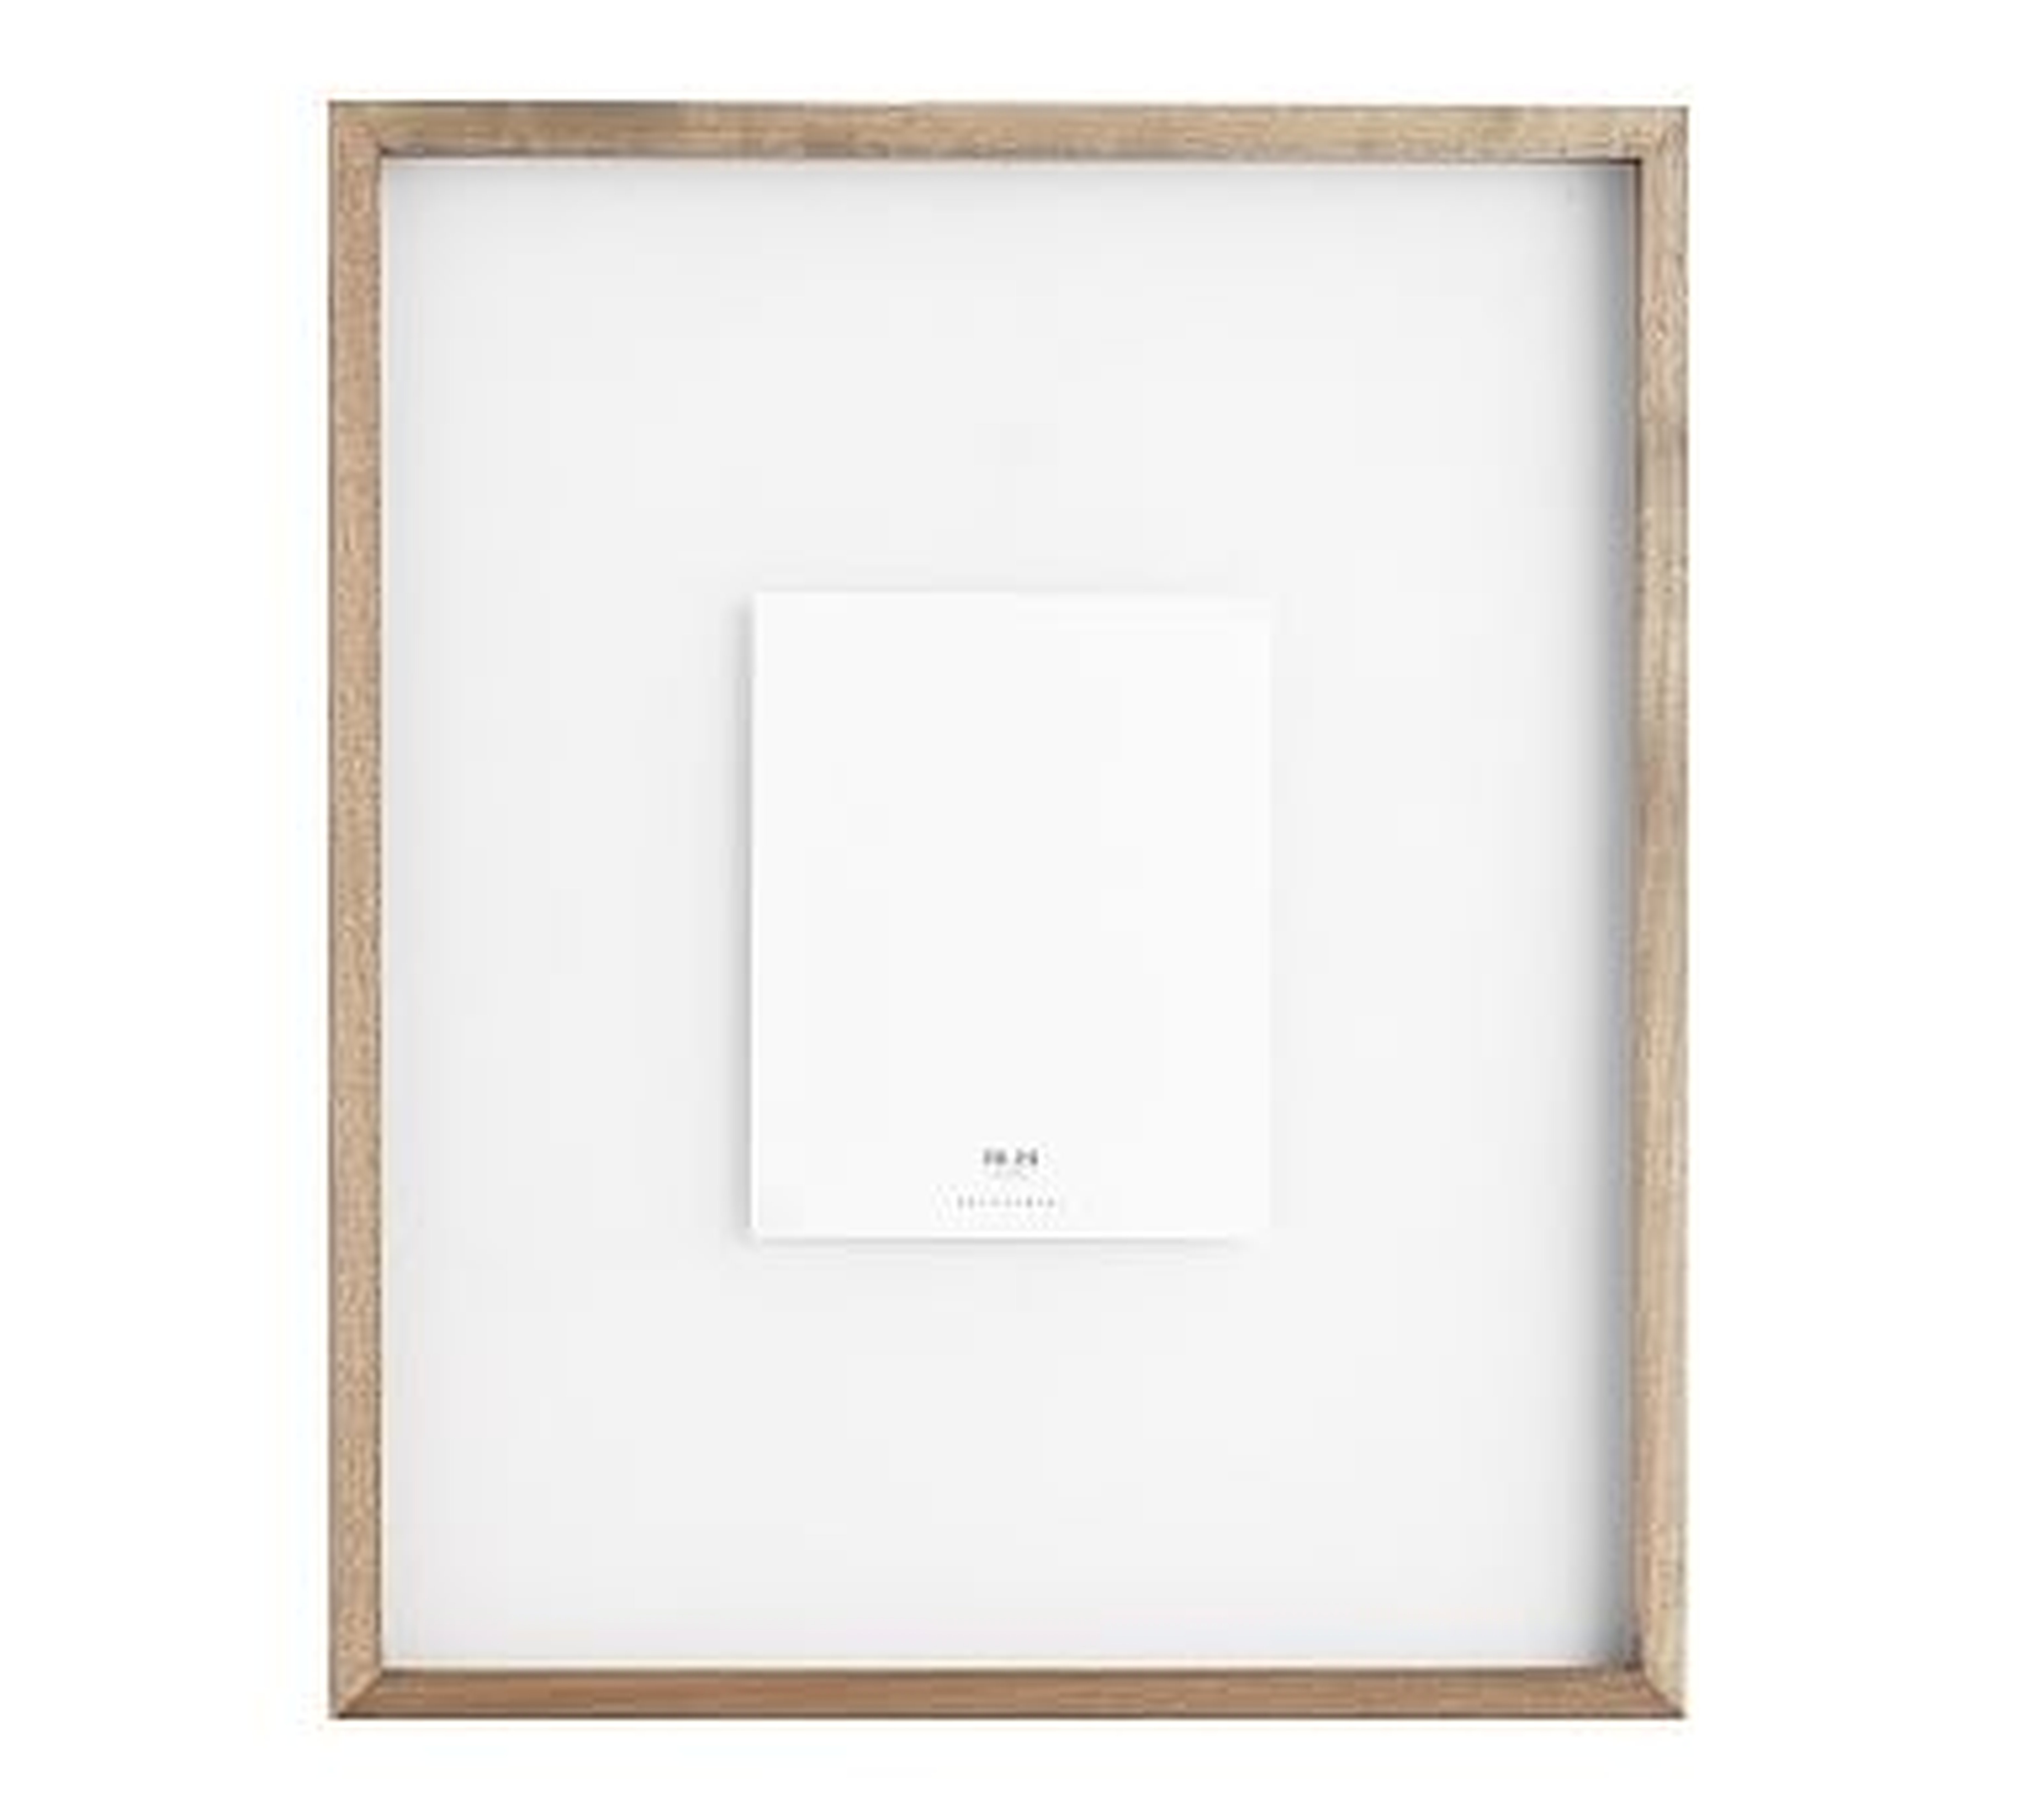 Floating Wood Gallery Frame, 20x24 (21x25 overall) - Graywash - Pottery Barn